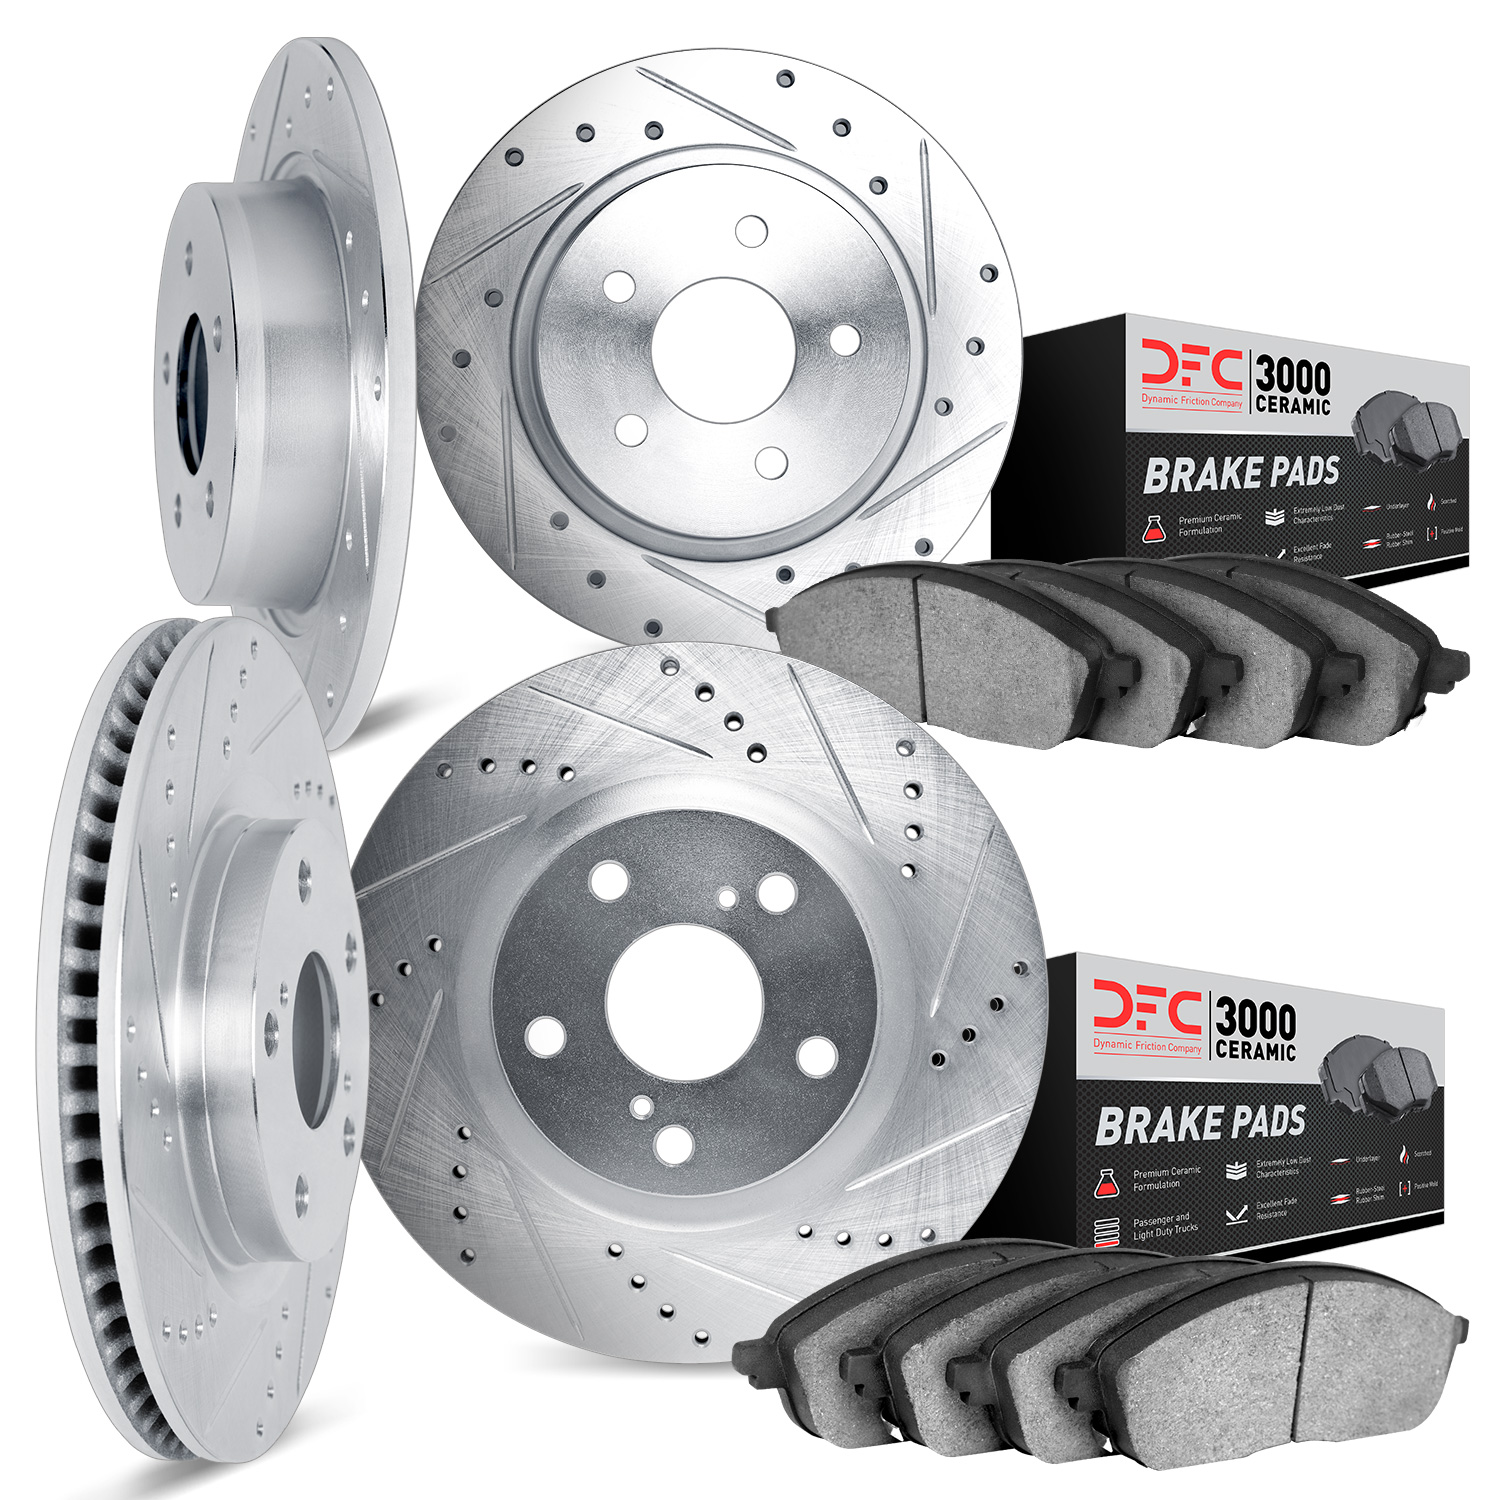 7304-54058 Drilled/Slotted Brake Rotor with 3000-Series Ceramic Brake Pads Kit [Silver], 2002-2005 Ford/Lincoln/Mercury/Mazda, P